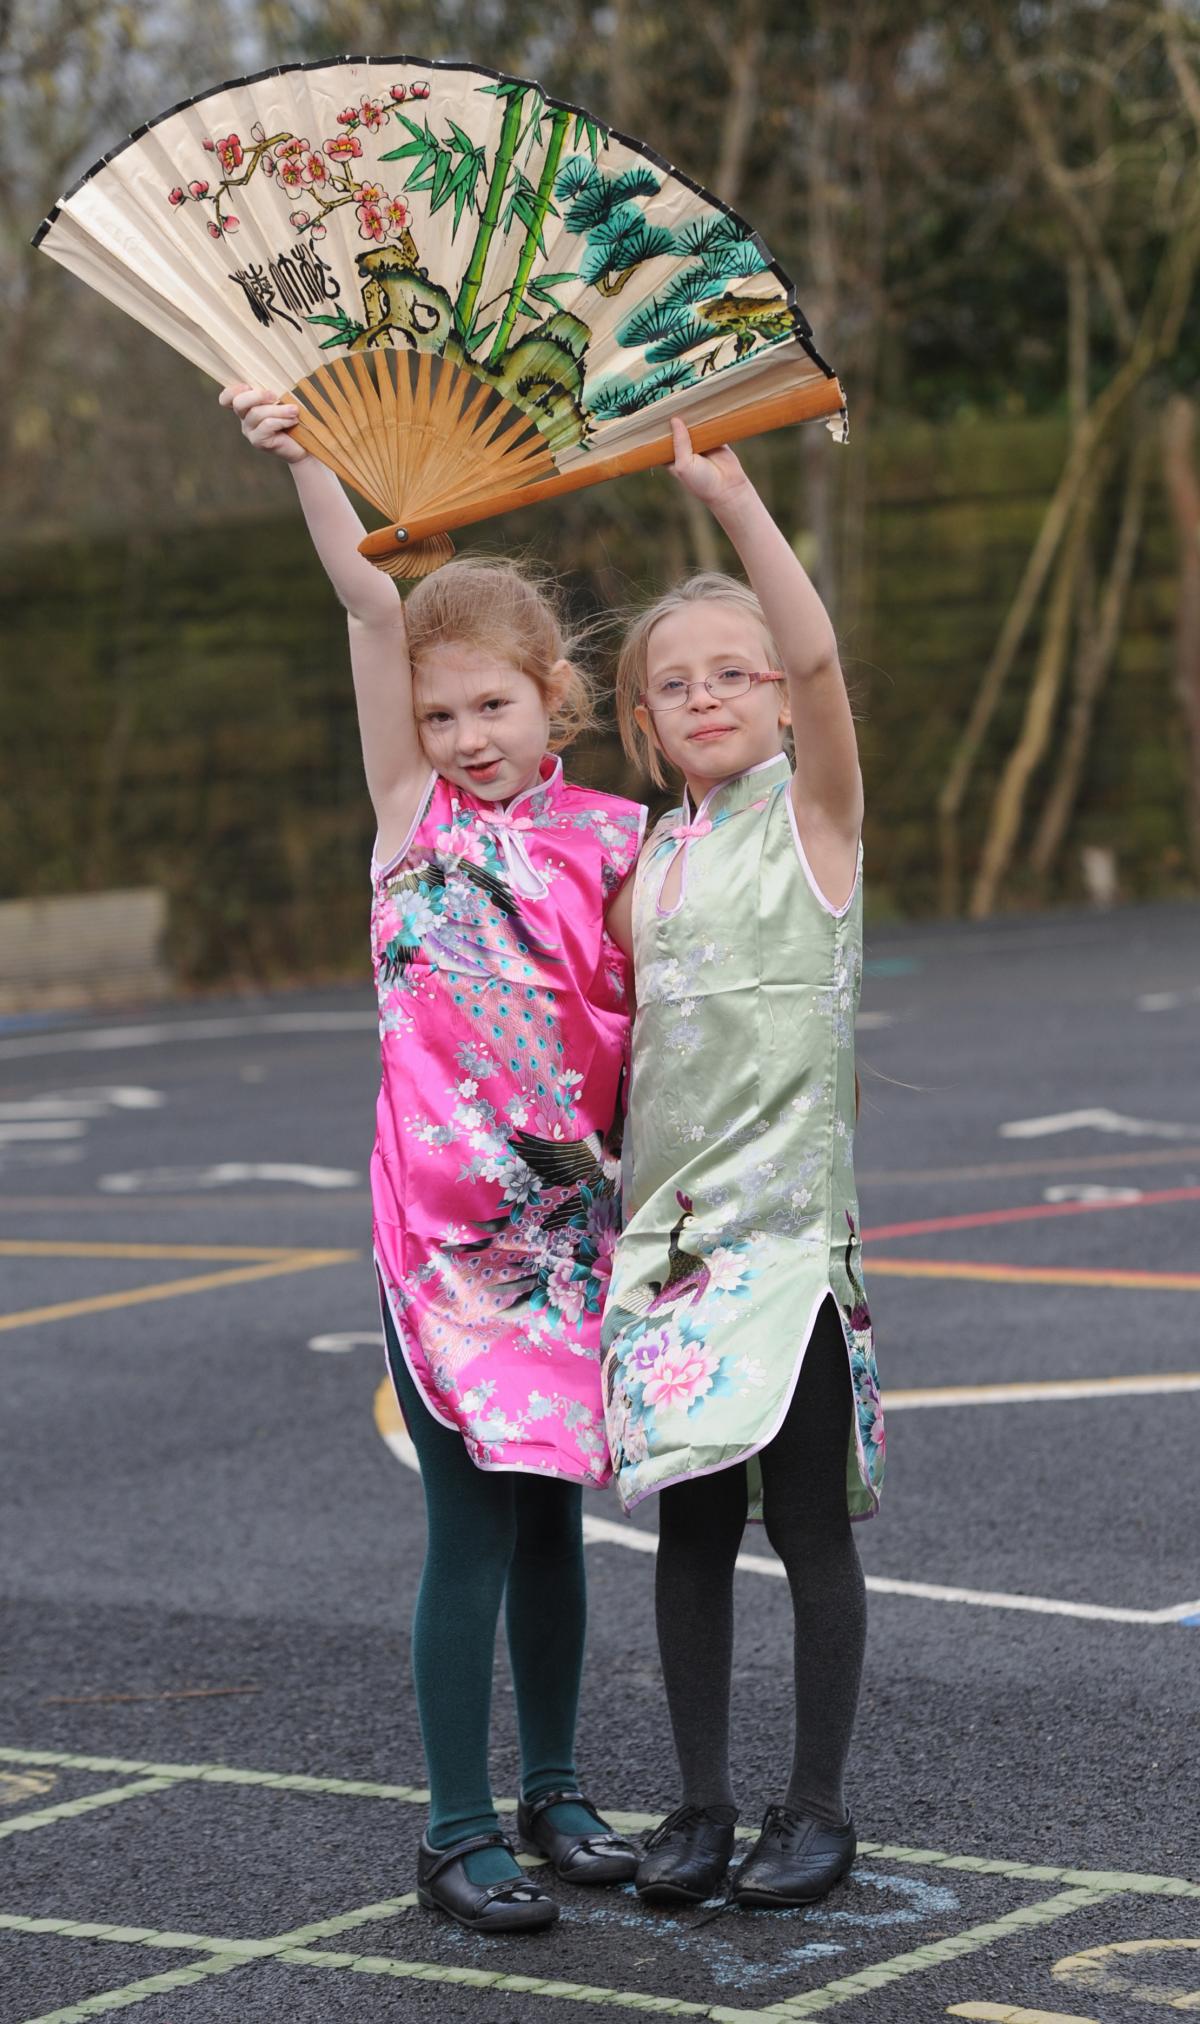 Children in Year 1 and 2 at Padiham Green Primary school take part in Chinese activities in the run up to Chinese New Year and also because the school is linked to a school in Quingdao in China.
Pictured are Tia Davies and Verity Bleasedale (